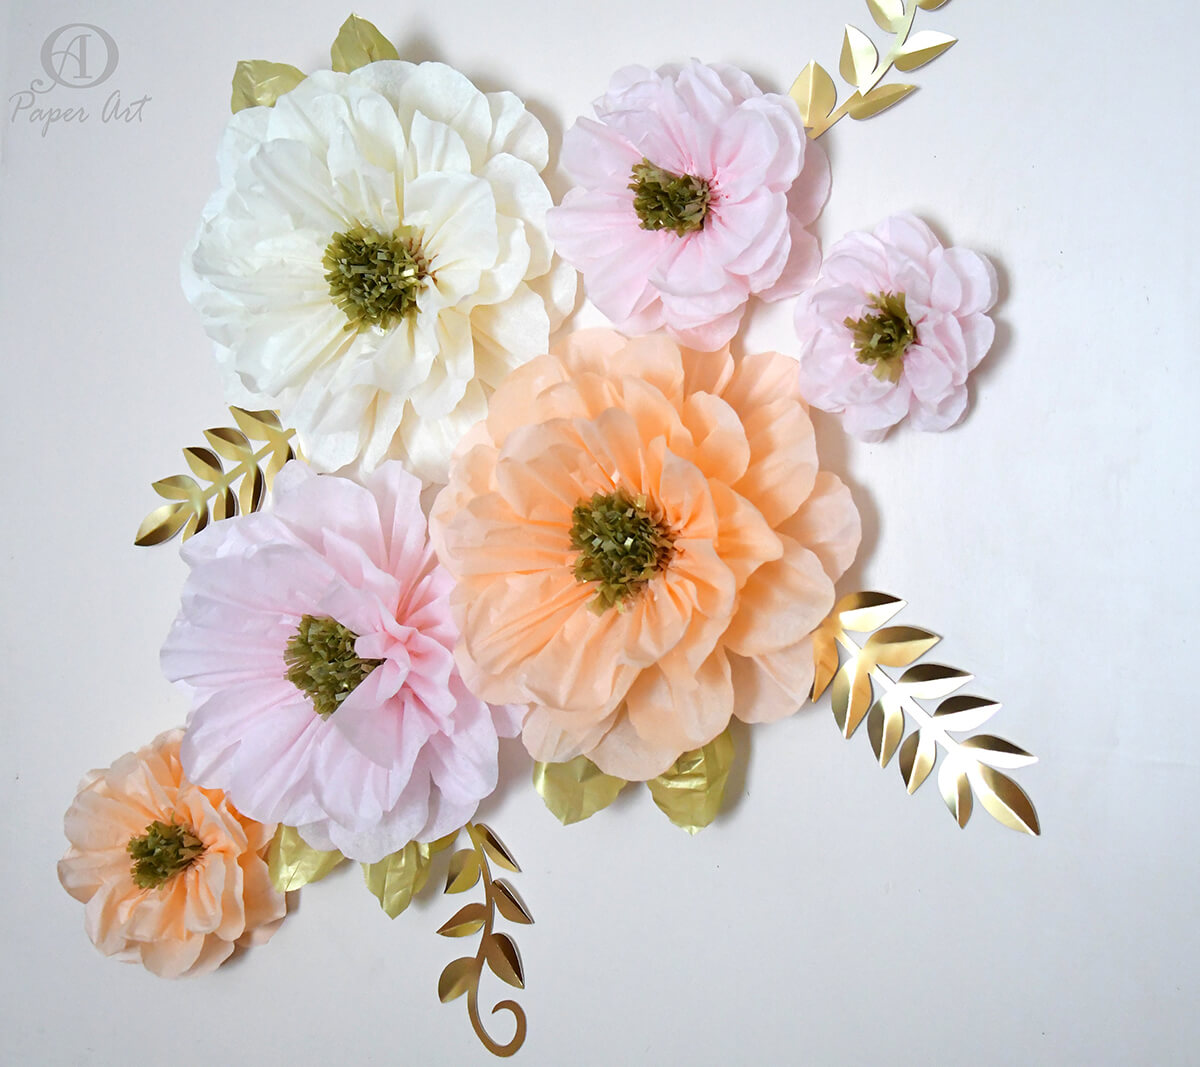 Luscious Tissue Flowers with Gold Foil Leaf